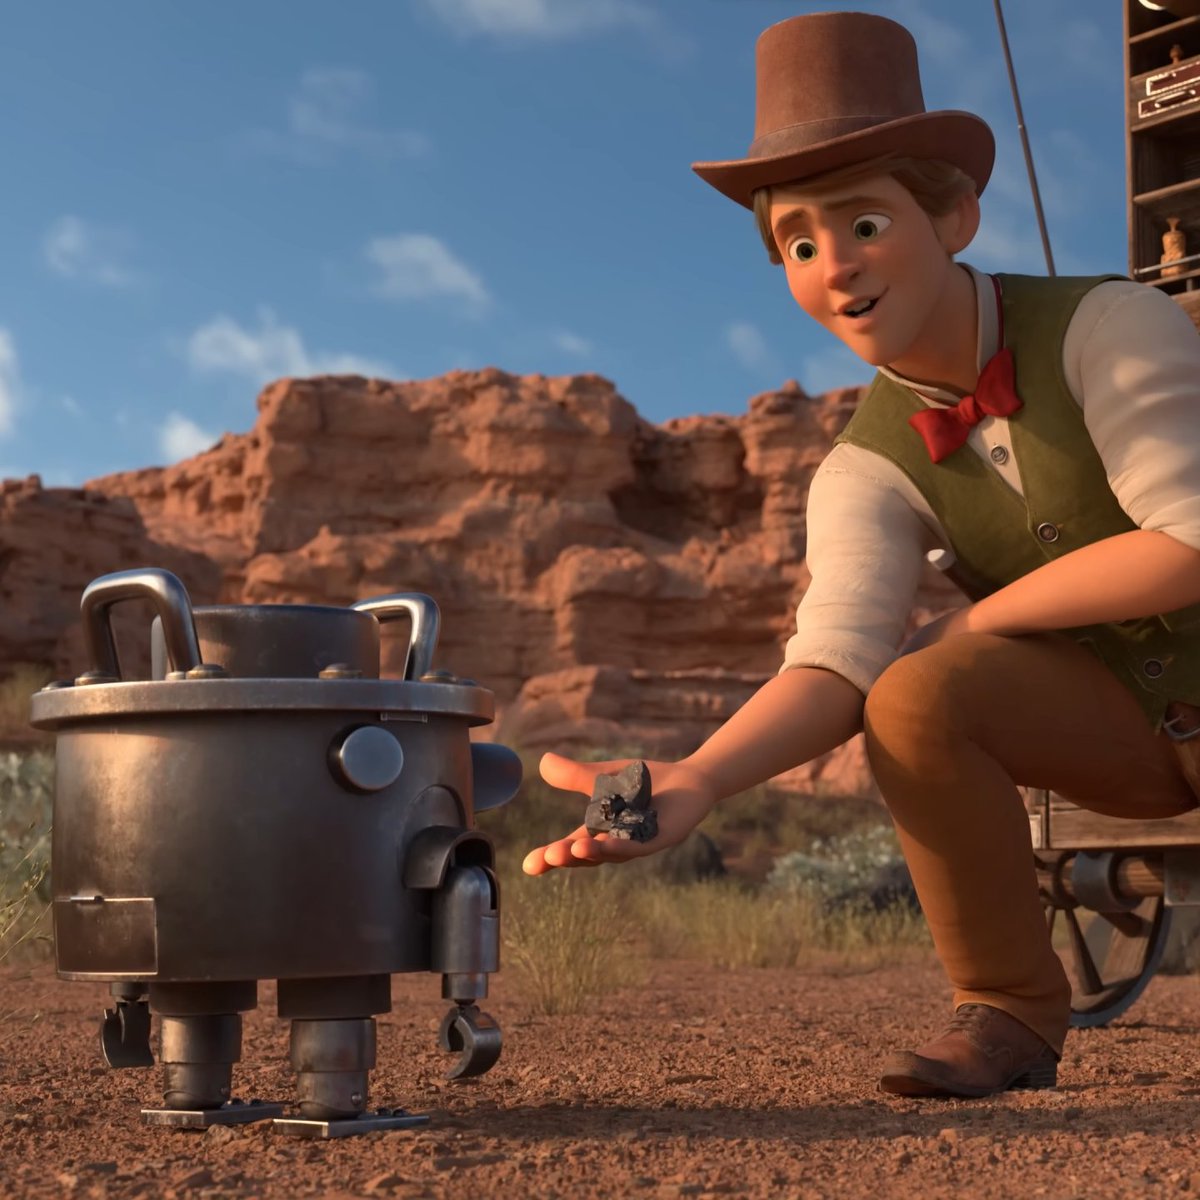 Sometimes all you need is a little extra kindness.

Episode 1 NOW STREAMING on YouTube!
(Click Link in Bio)

#animatedshow #MechWestShow #MechWest #animschool #animschoolstudios #3Danimation #kidstv #indieanimation #wildwest